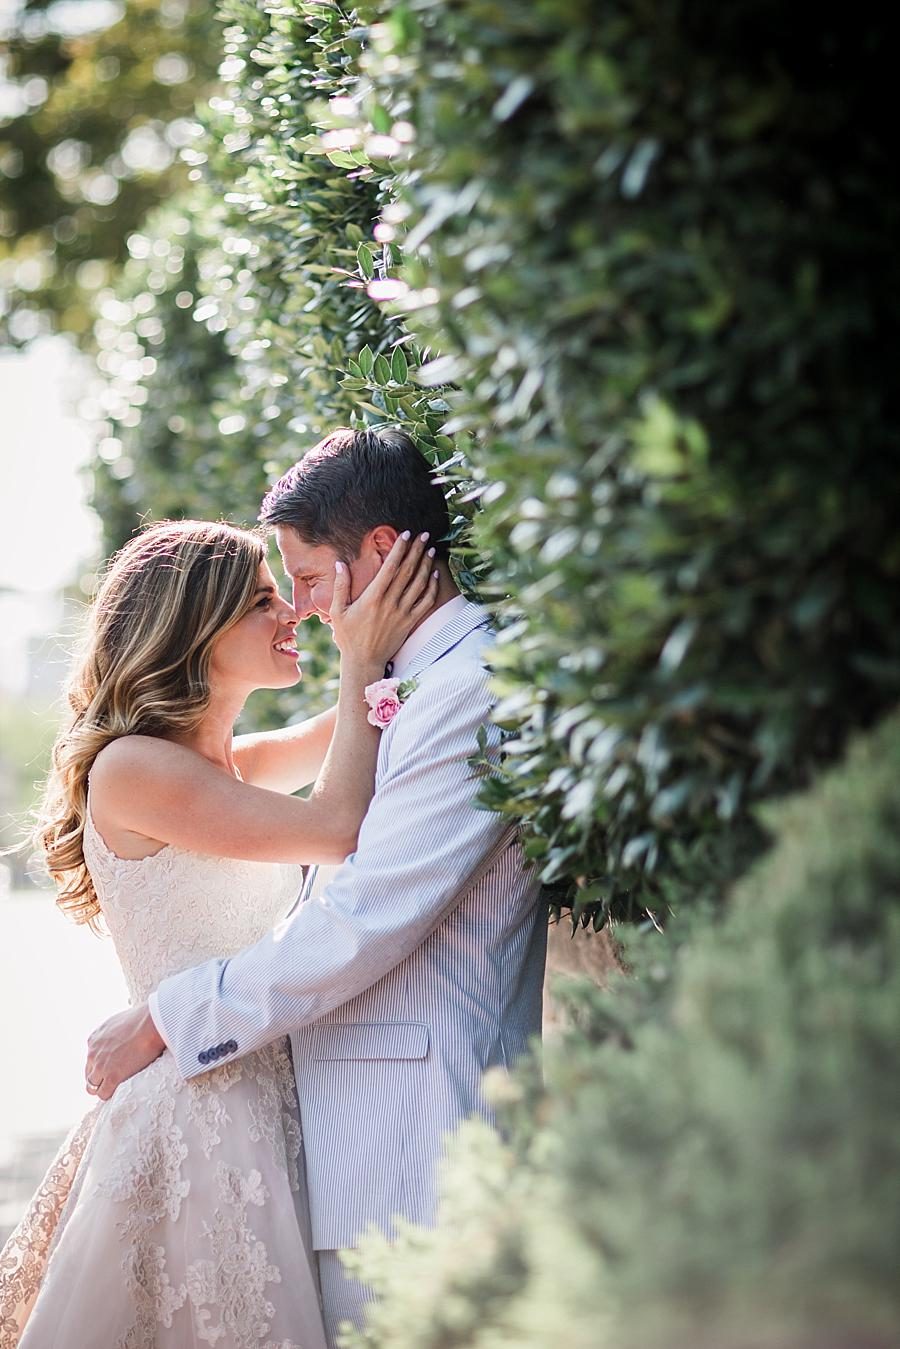 Holding groom by cheek smiling at this East Ivy Mansion Wedding session by Knoxville Wedding Photographer, Amanda May Photos.